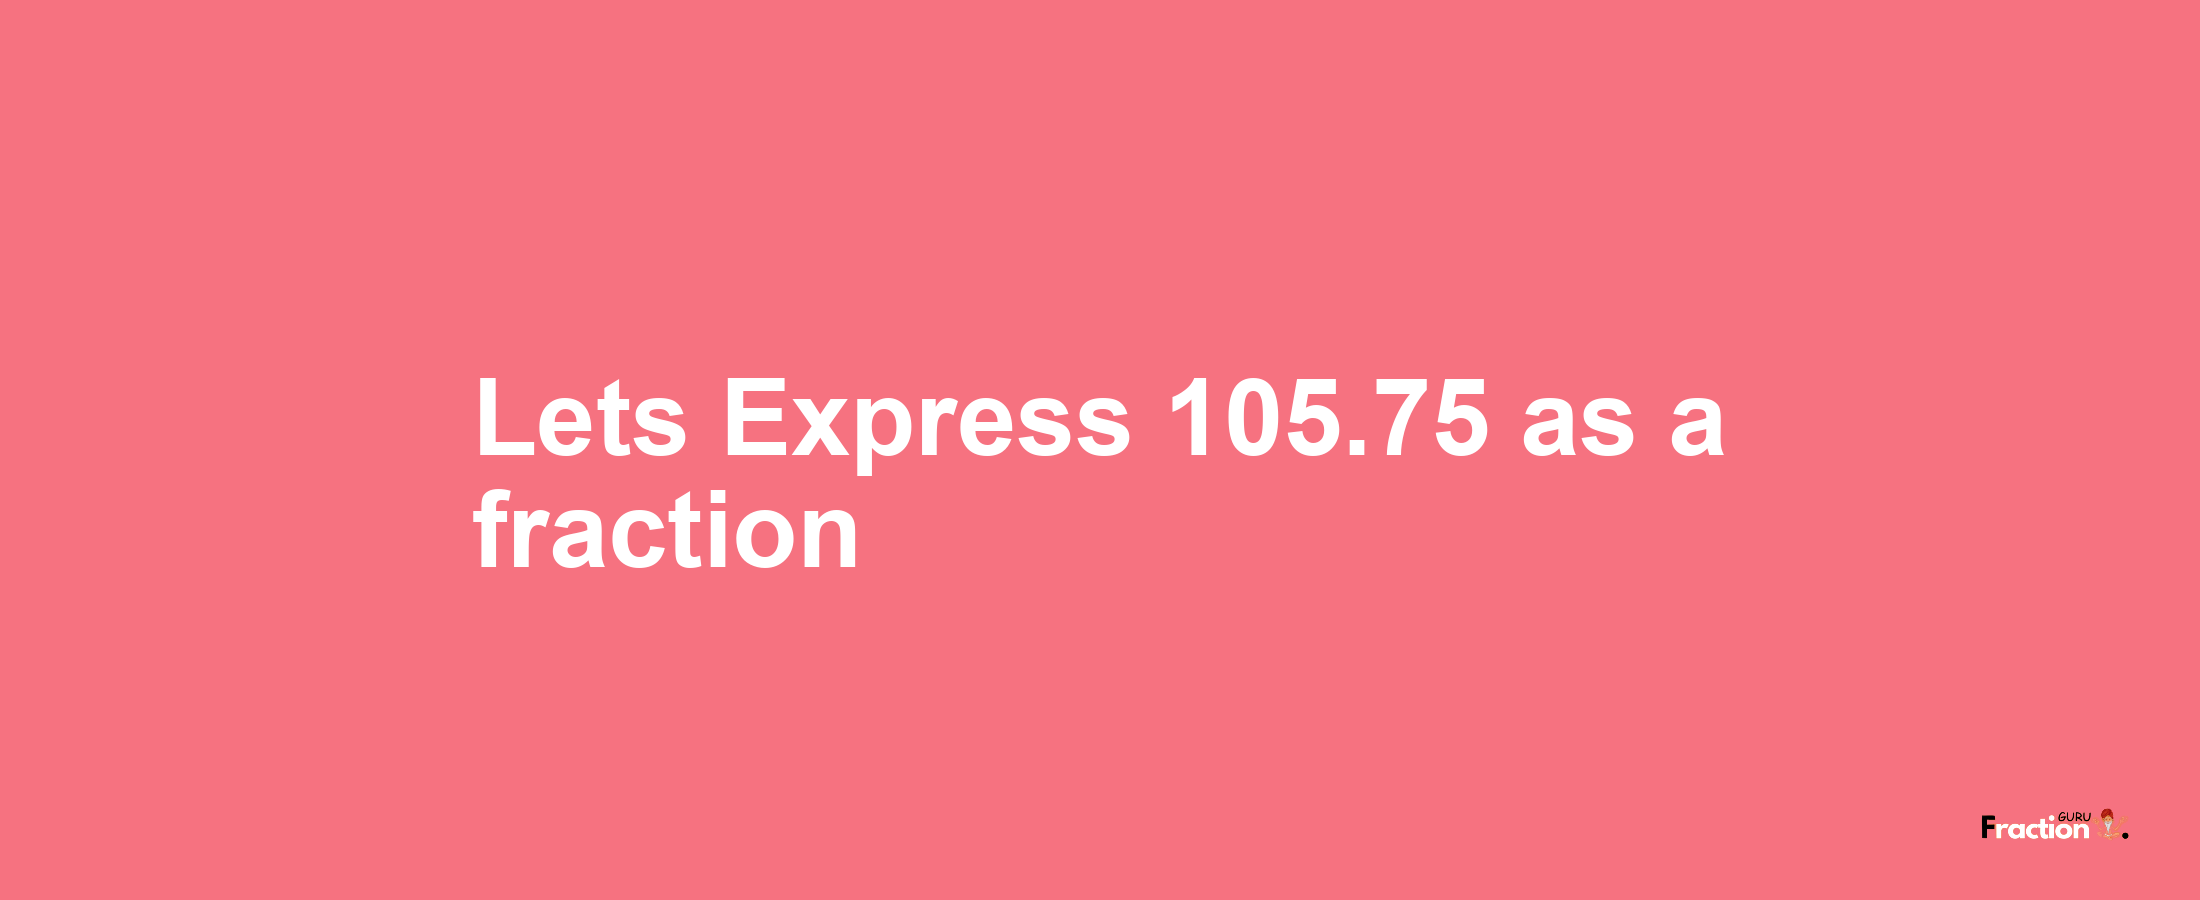 Lets Express 105.75 as afraction